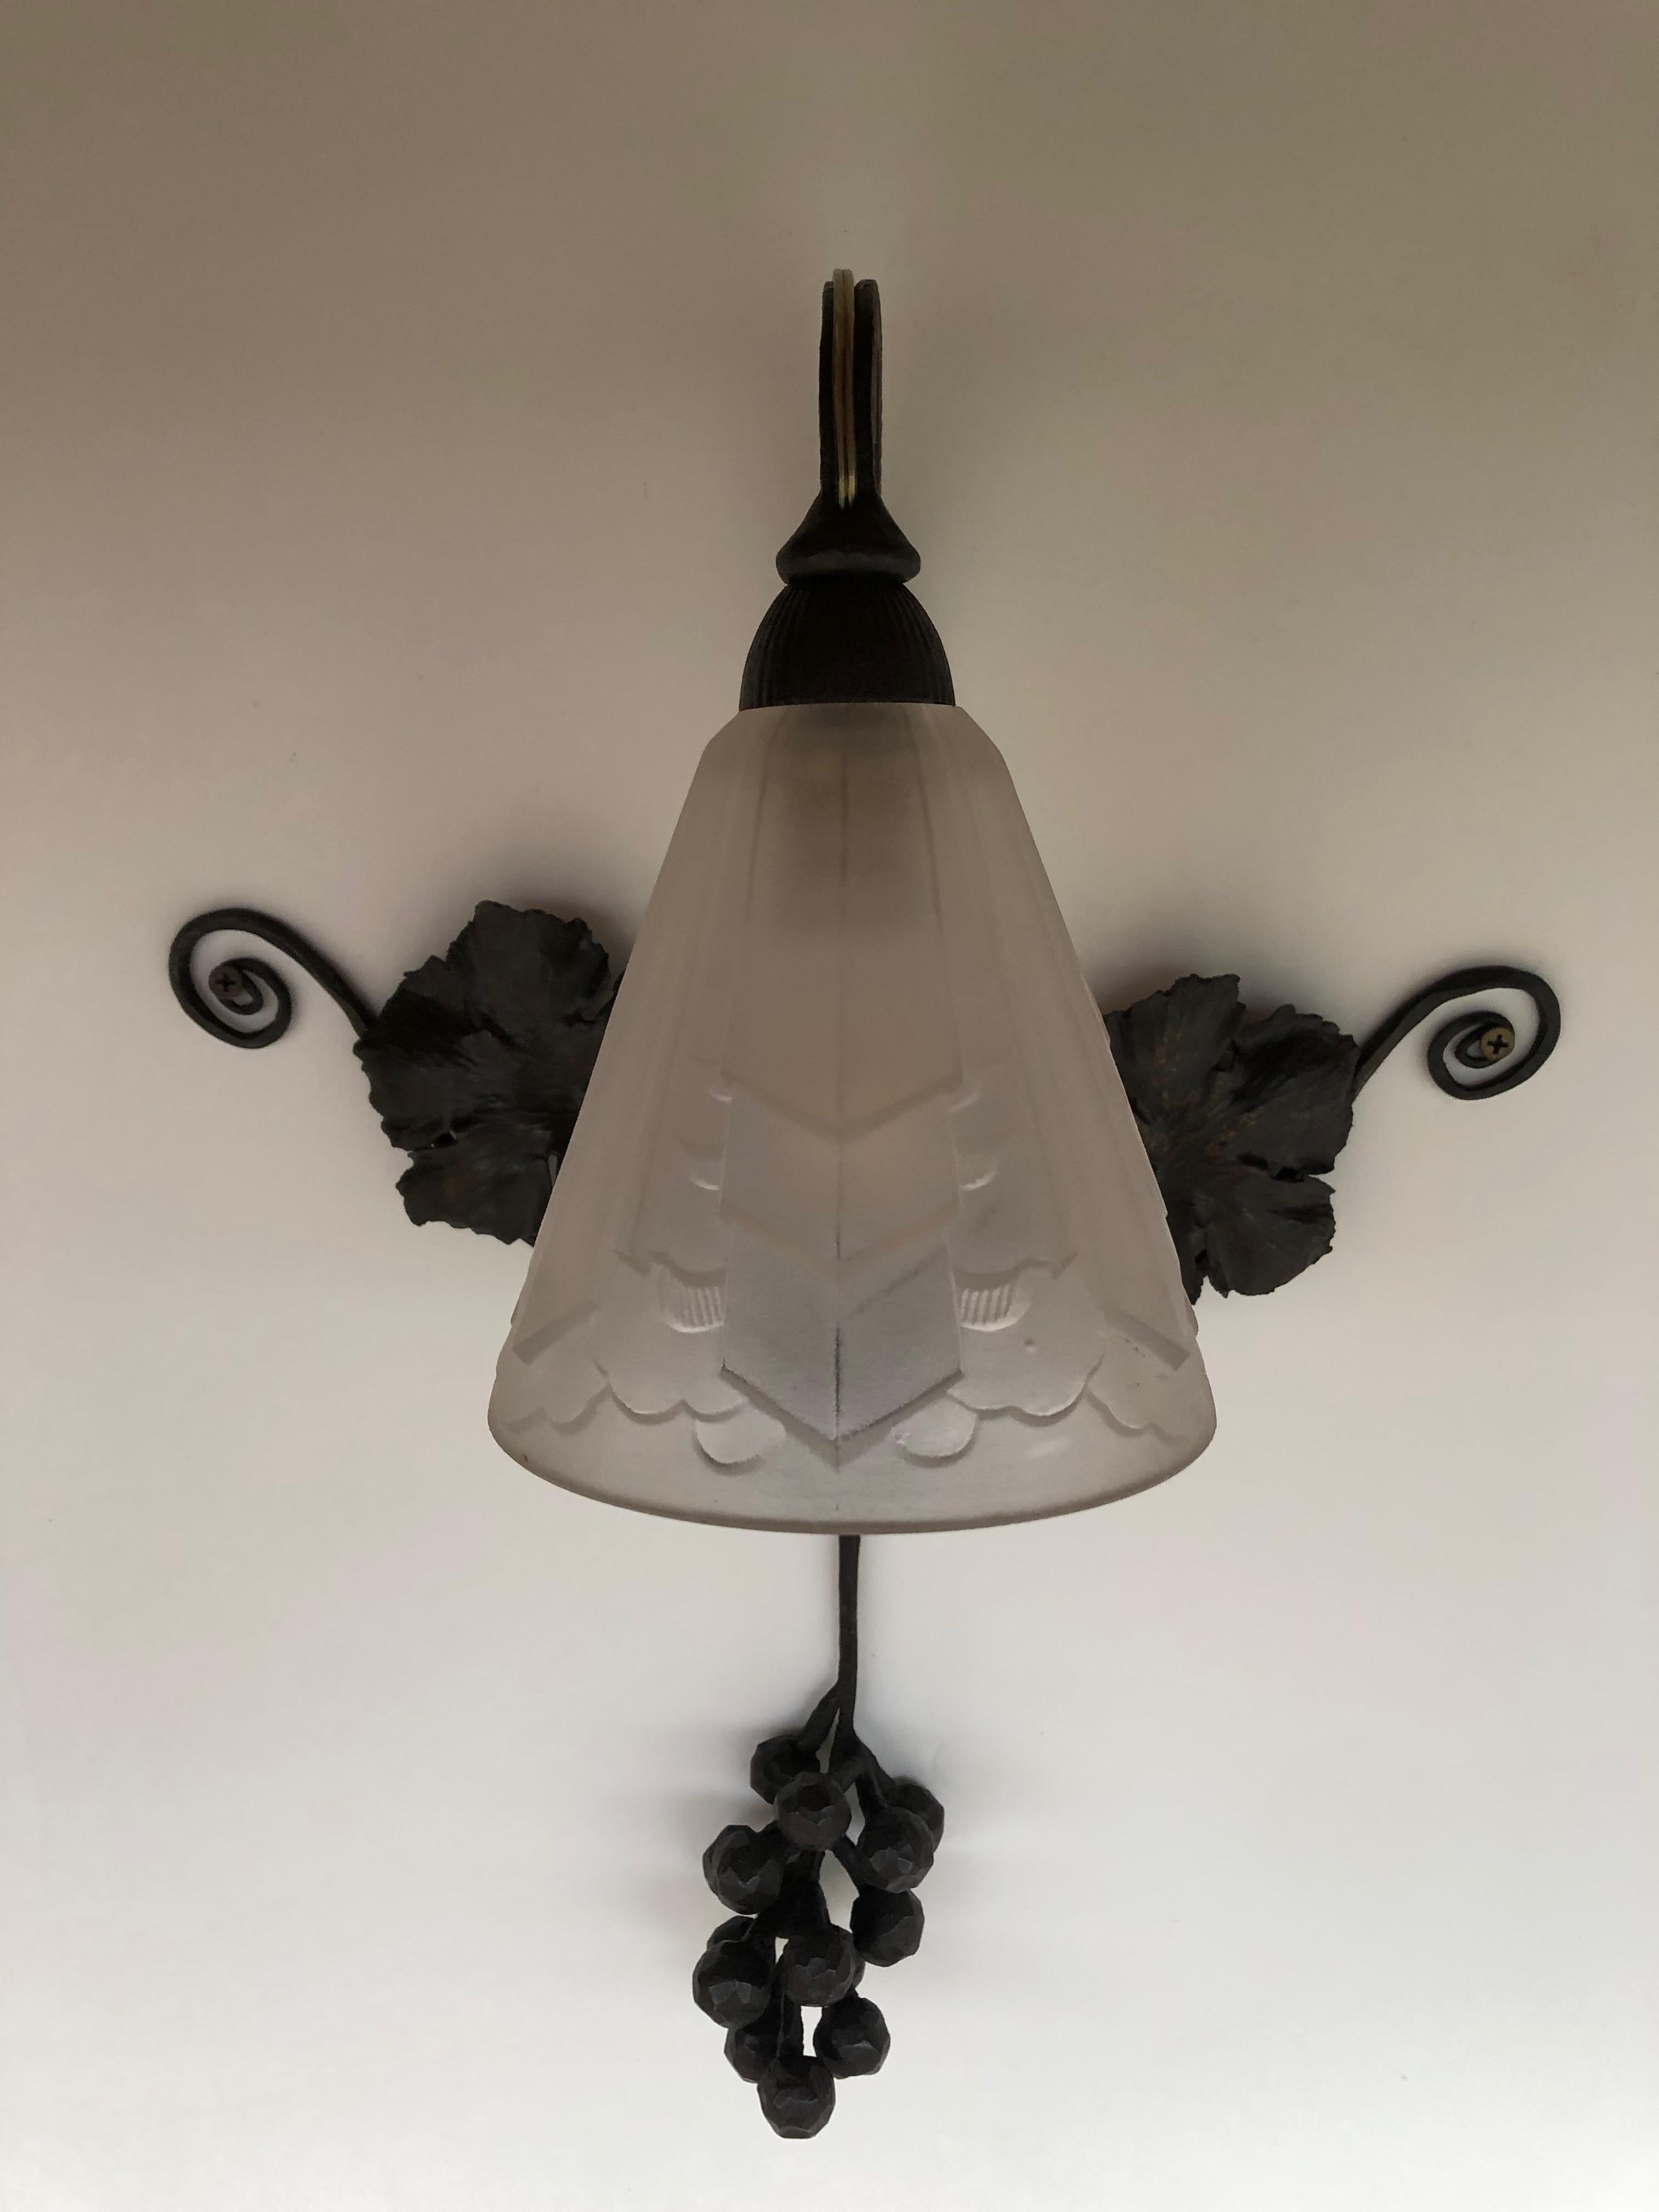 20th Century Art Deco Wall Lamp in the style of Degue. For Sale